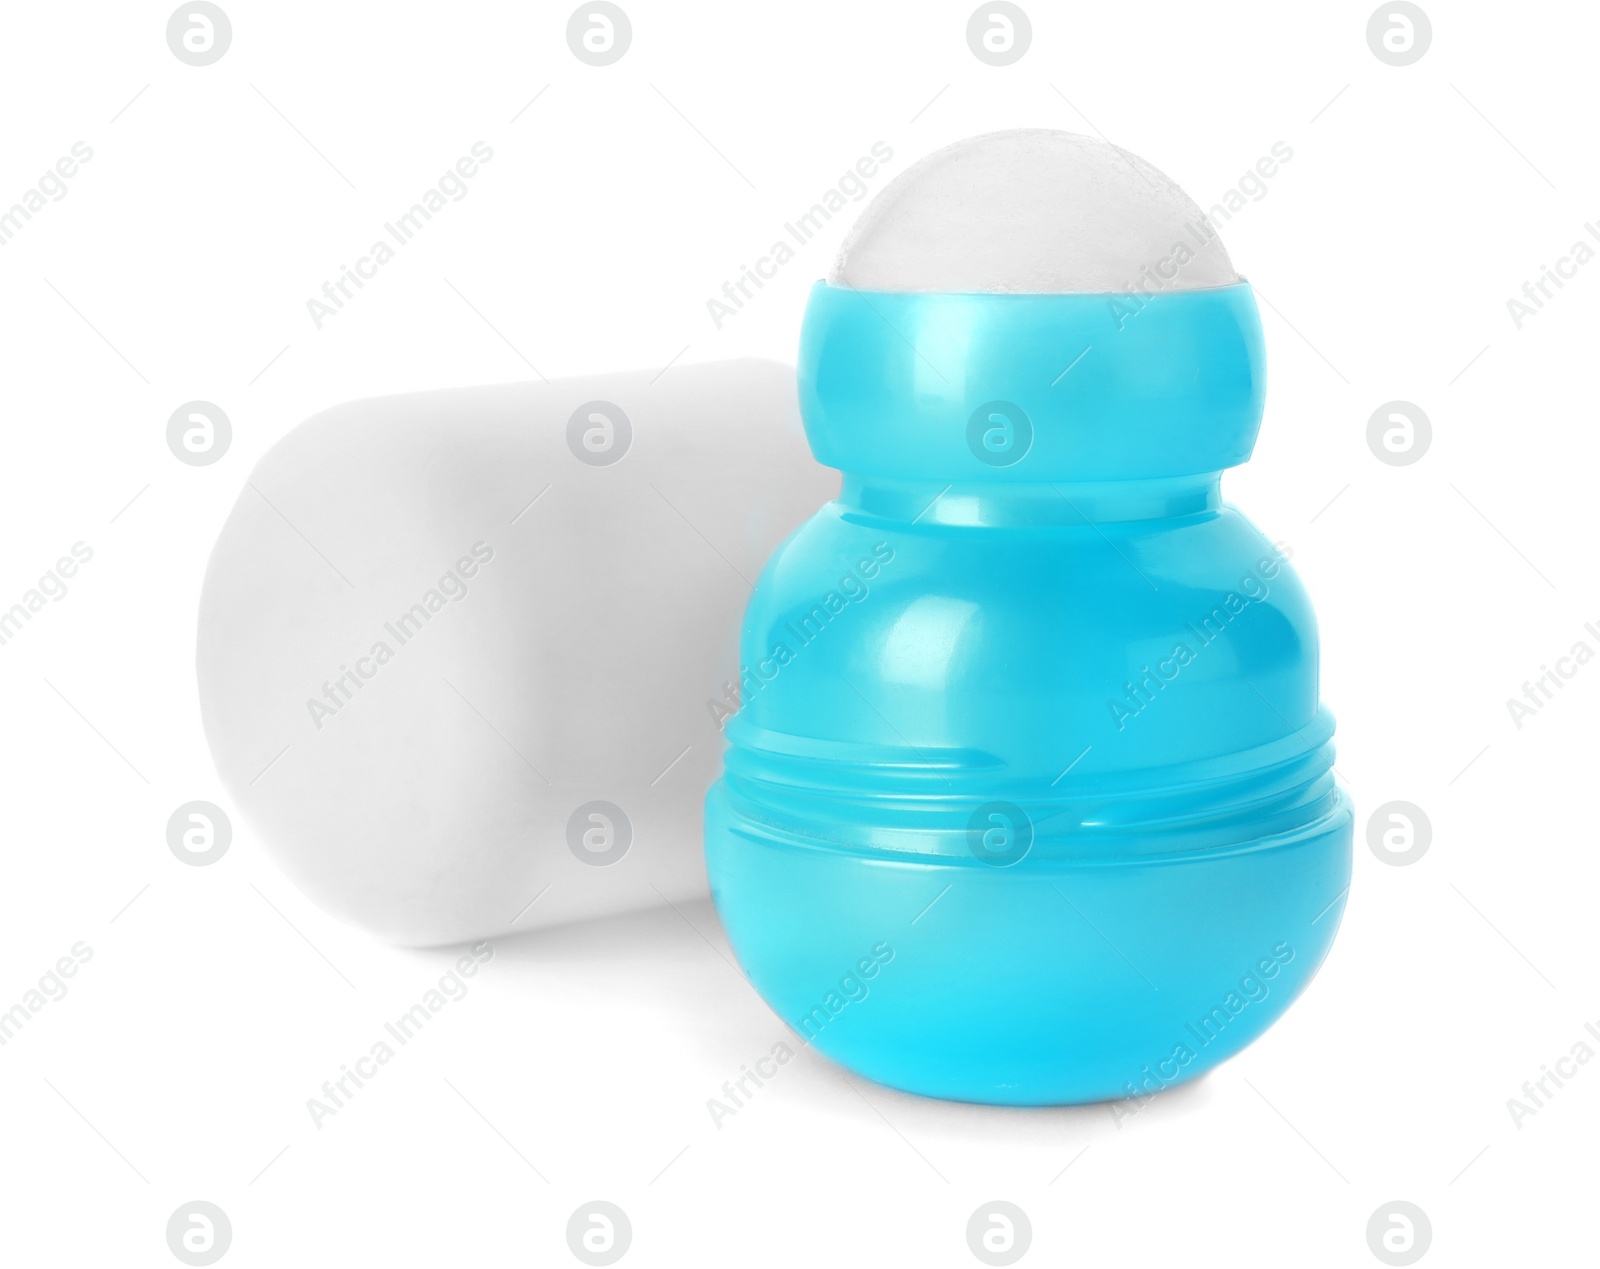 Photo of Roll-on deodorant on white background. Skin care